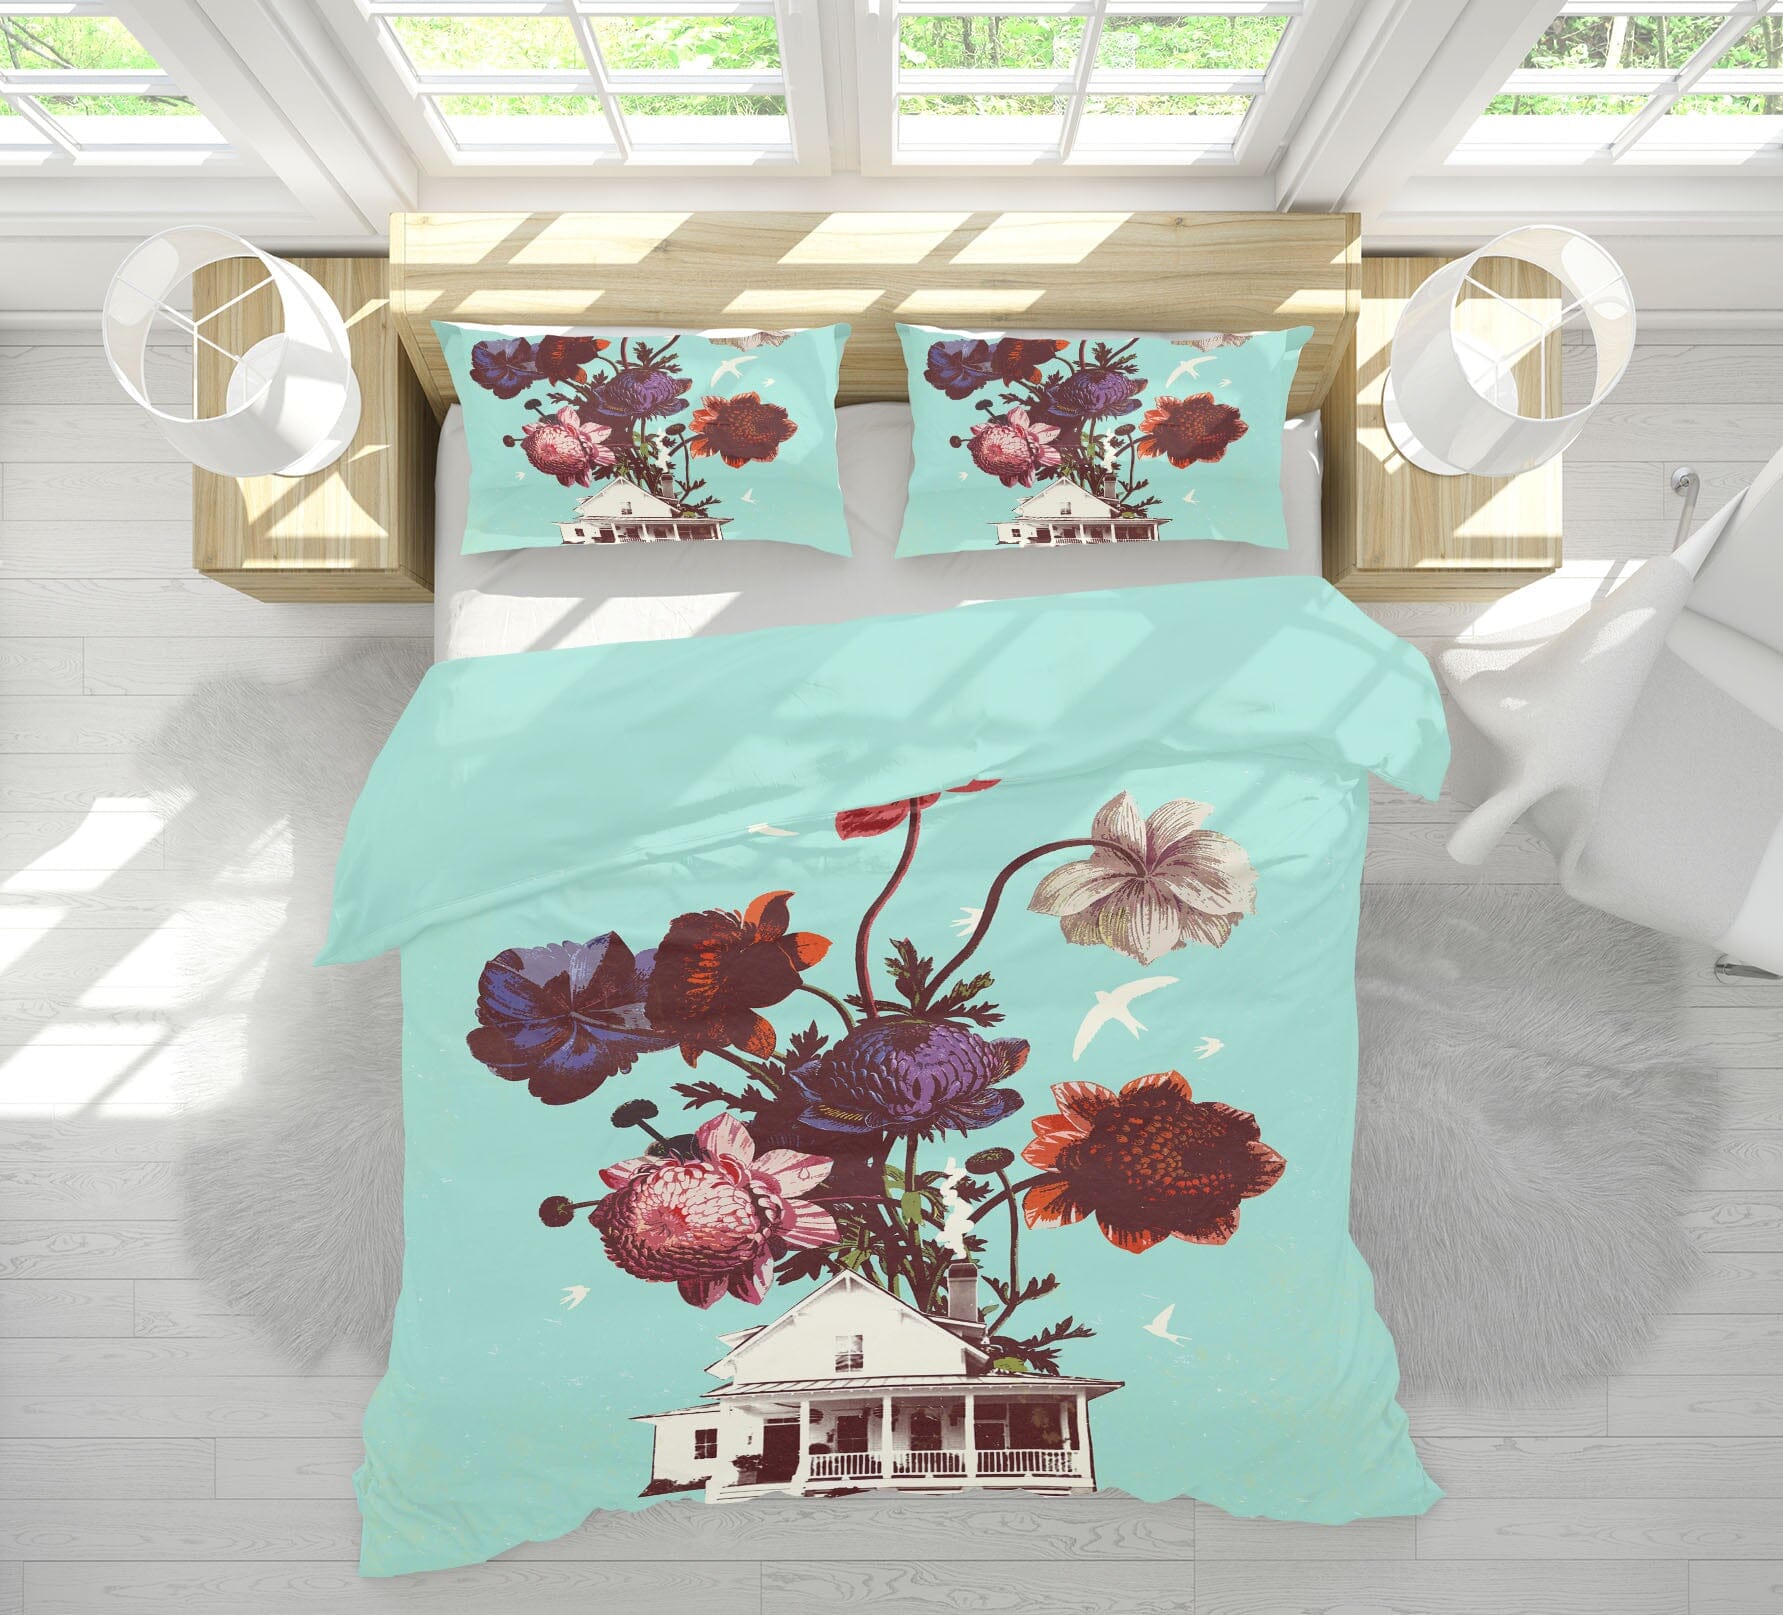 3D Flower Room 2104 Showdeer Bedding Bed Pillowcases Quilt Quiet Covers AJ Creativity Home 